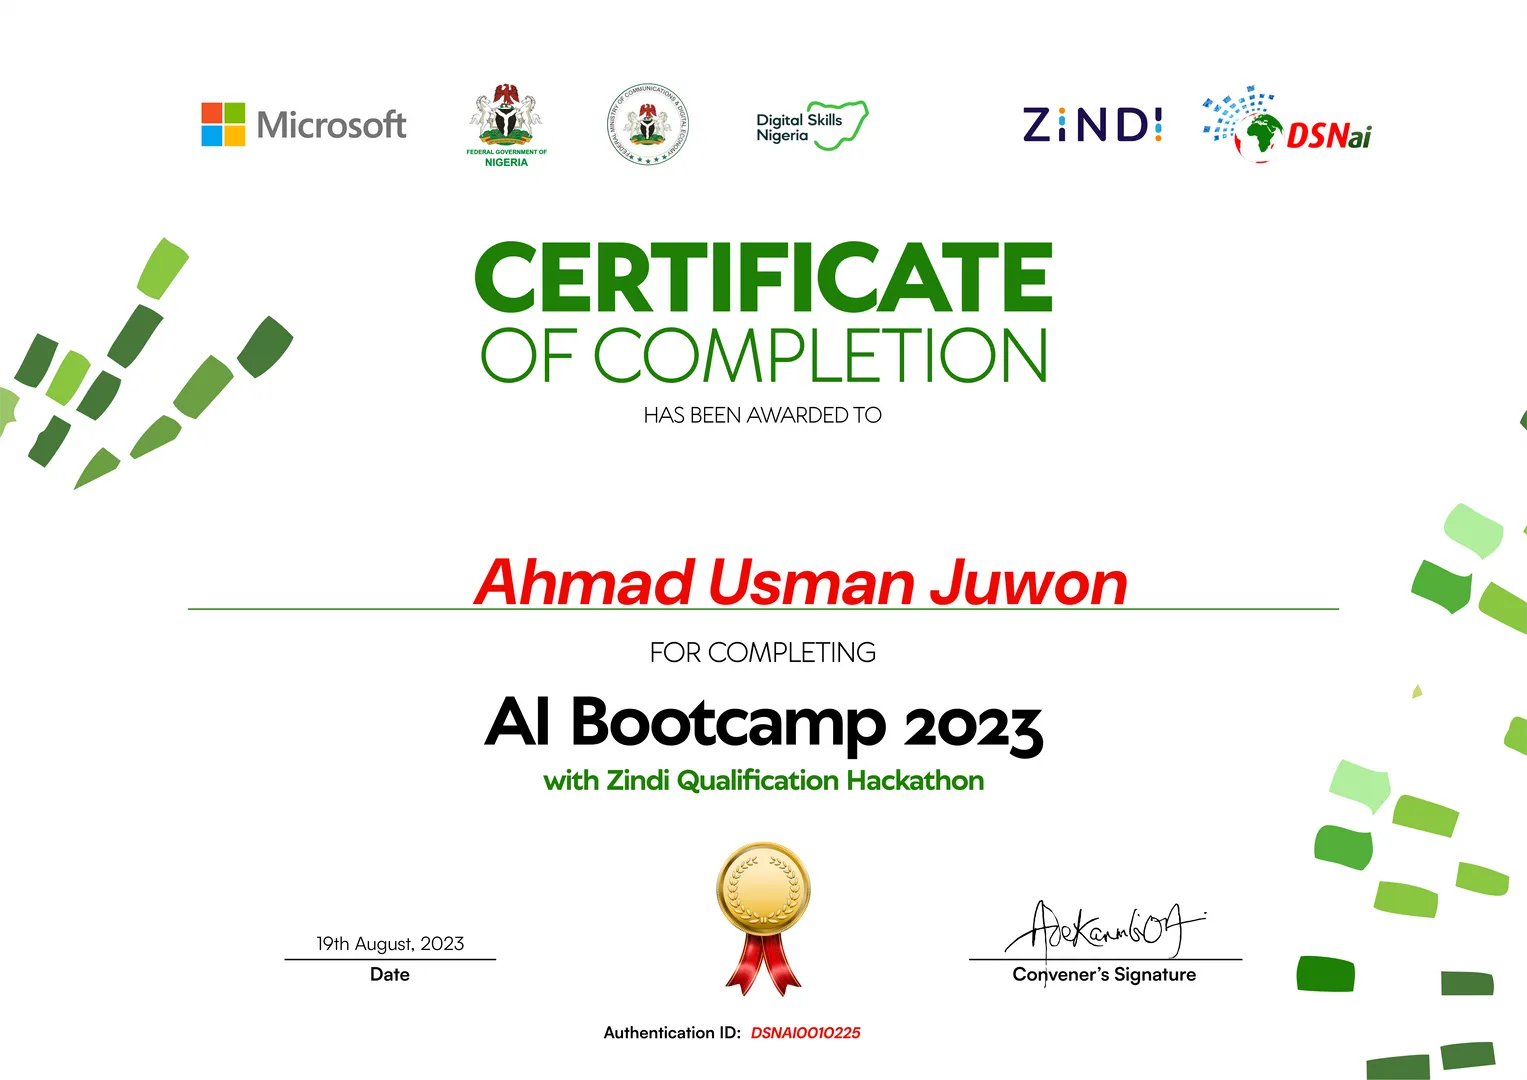 Just 2 weeks ago, I had the amazing opportunity to qualify for and participate in the Data Science Nigeria (DSN) 2023 AI Bootcamp. It was an exhilarating journey.

The adventure began with a qualification hackathon, which happened to be my very first hackathon since I embarked on my machine learning journey.  Completing it not only boosted my confidence but also secured my coveted spot at the week-long bootcamp.  

Throughout the intensive one-week bootcamp, I immersed myself in the world of AI and data science like never before. From delving into Geographic Information Systems (GIS) for the first time to deepening my understanding of computer vision, each day was a rewarding experience. I couldn't help but feel a surge of excitement during the computer vision sessions, as I found myself connecting concepts I had studied in the deep learning course on Coursera.

The bootcamp also included engaging sessions on Natural Language Processing (NLP) and eye-opening insights into research. One of the standout moments was the chance to explore student research posters, offering a glimpse into how posters are structured.

In just one week, the DSN AI Bootcamp has provided me with an incredible learning experience that will undoubtedly shape my path forward. I can't wait to see where this exciting journey leads next!